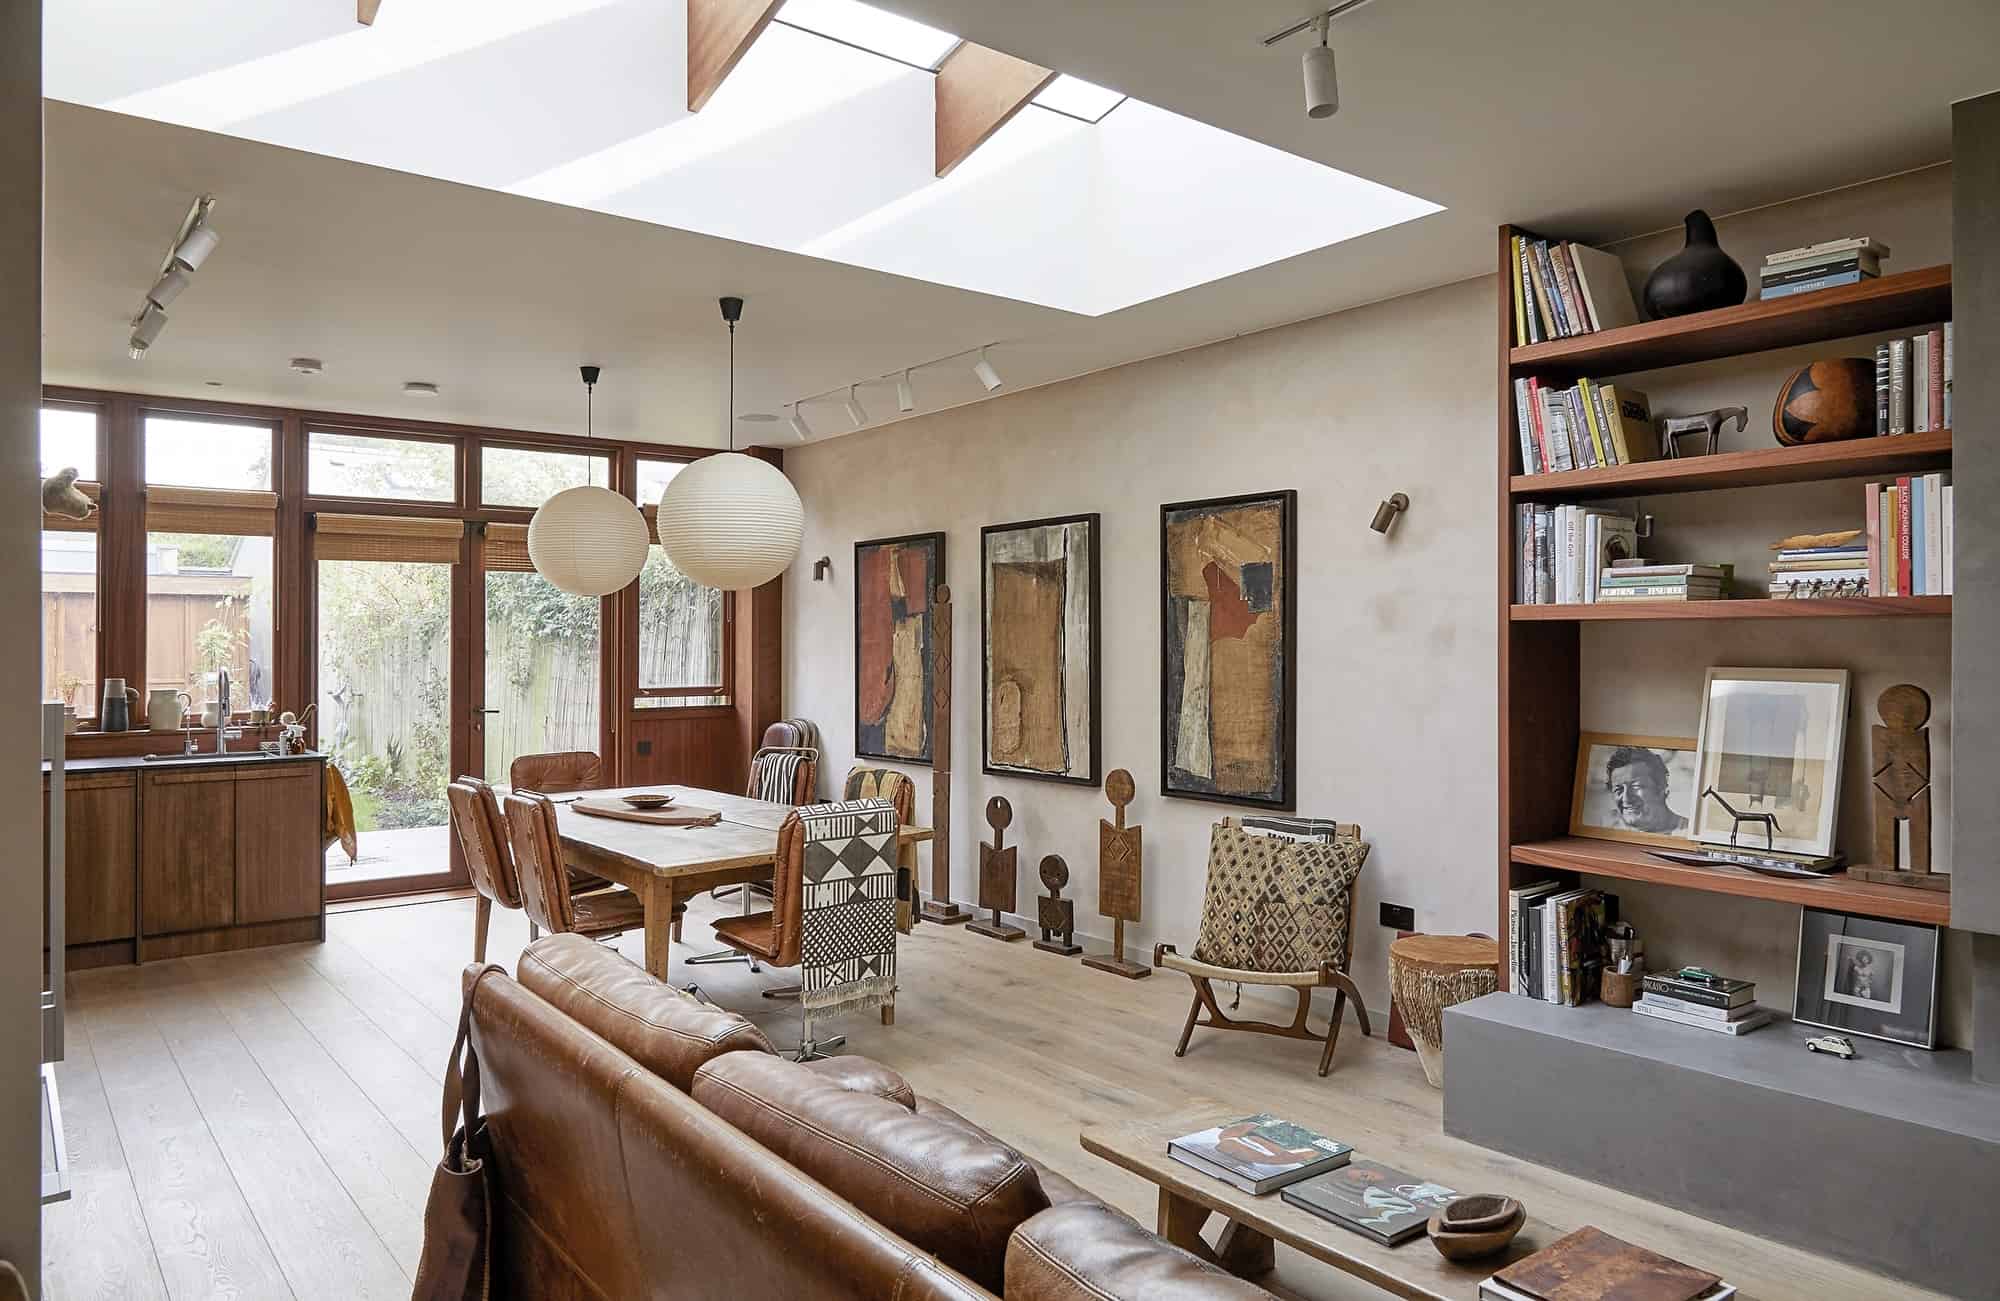 Arthouse NW10 - A beautifully designed bright home with interiors crafted from natural materials and with textural elements throughout - The Location Guys